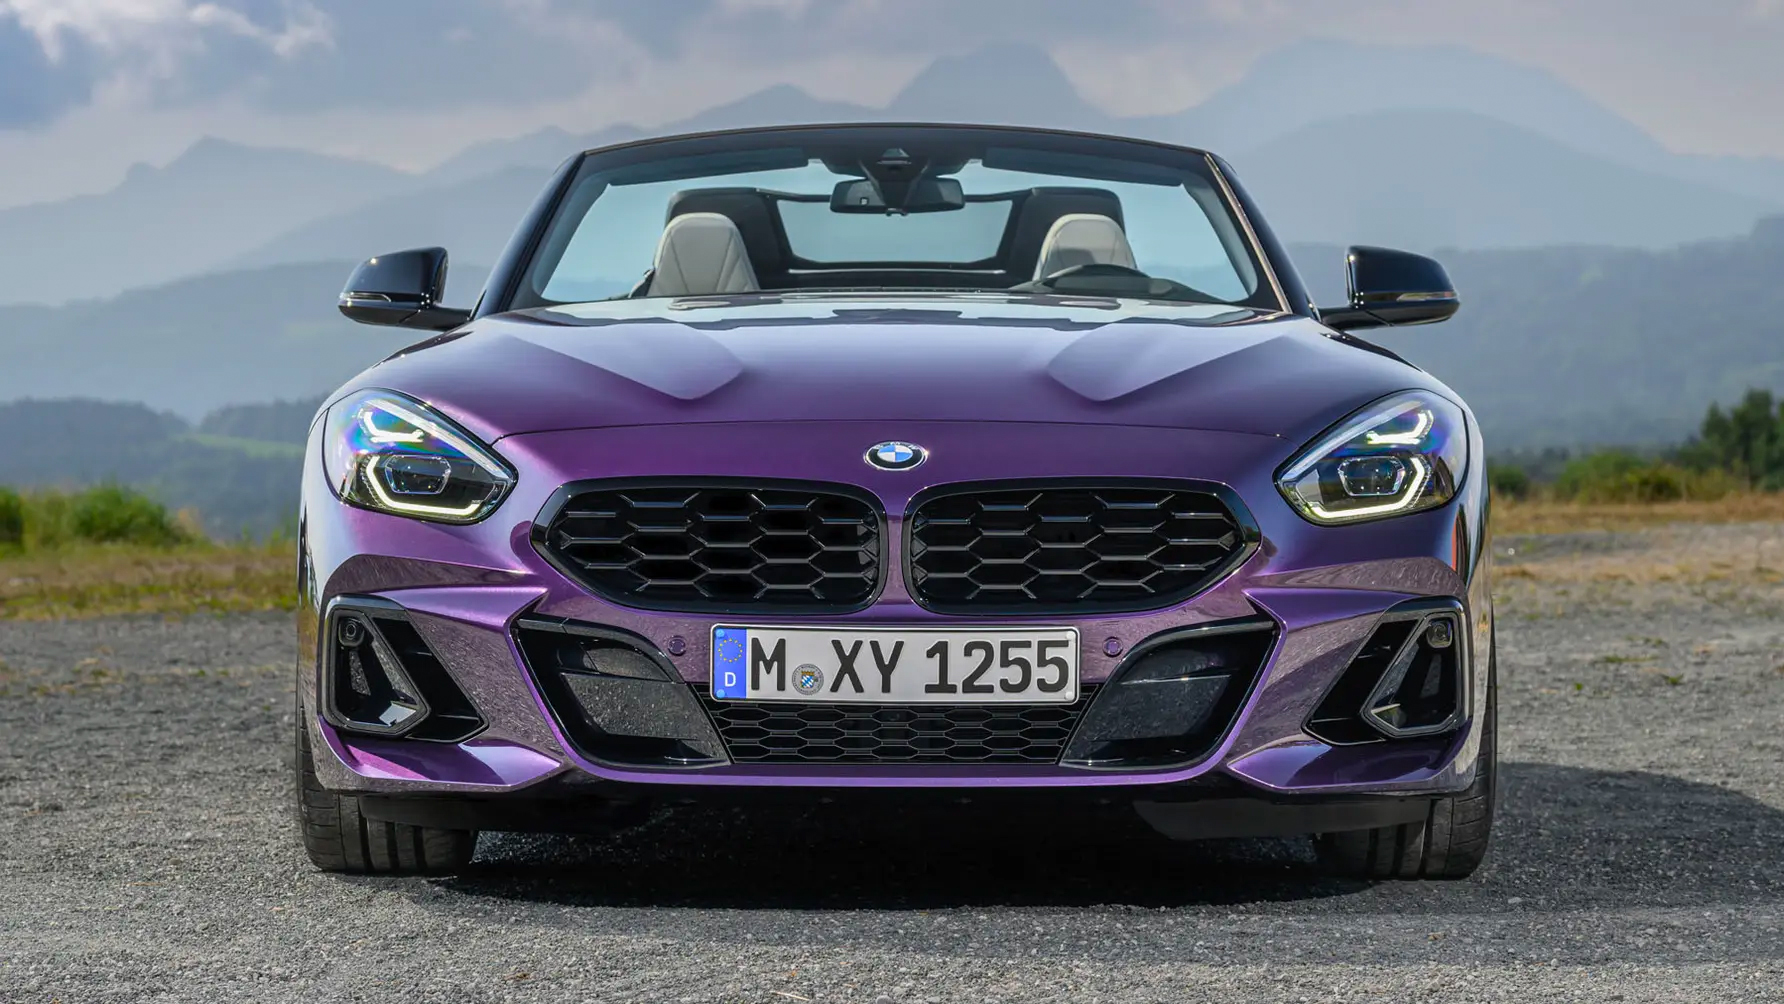 There is nothing new about the 'new' BMW Z4